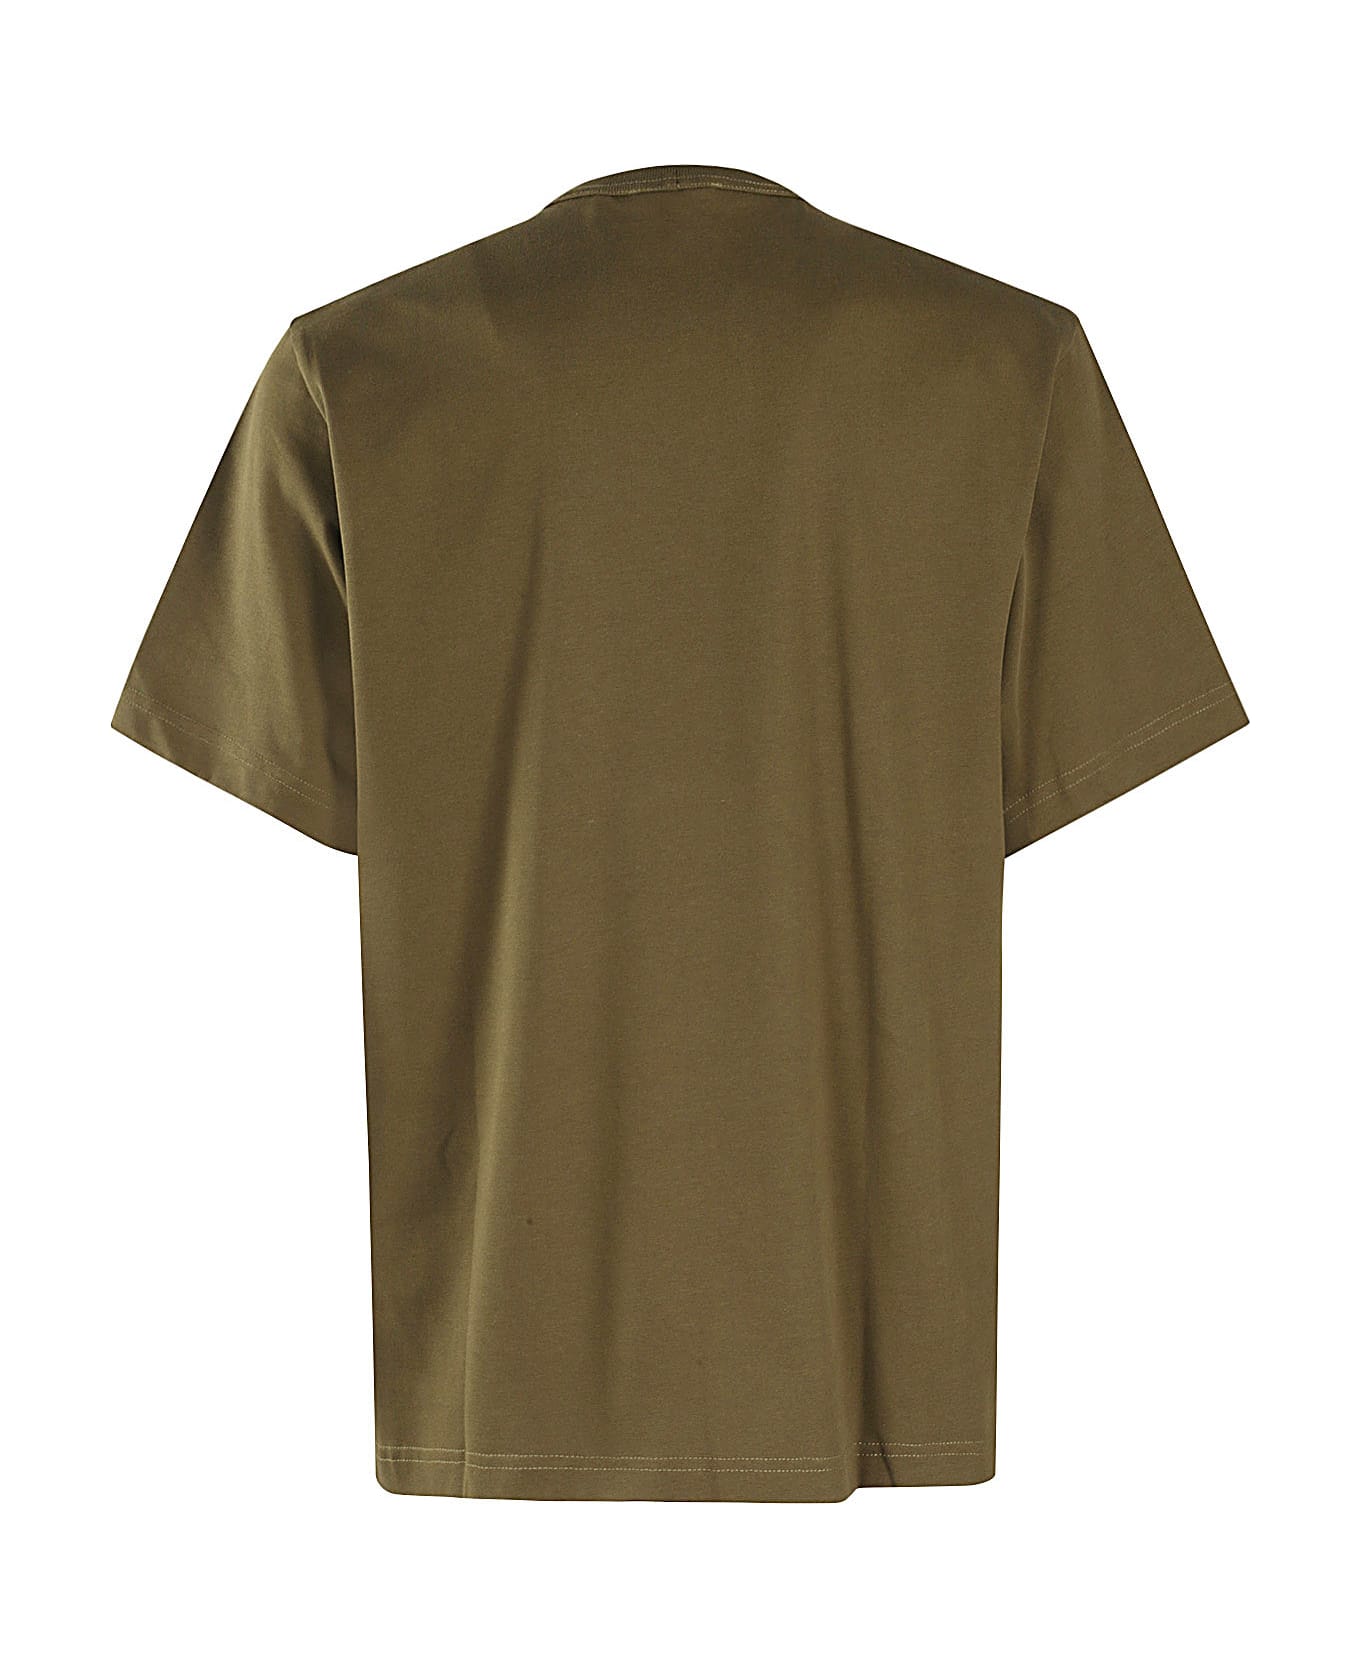 Helmut Lang Outer Tee - X Olive